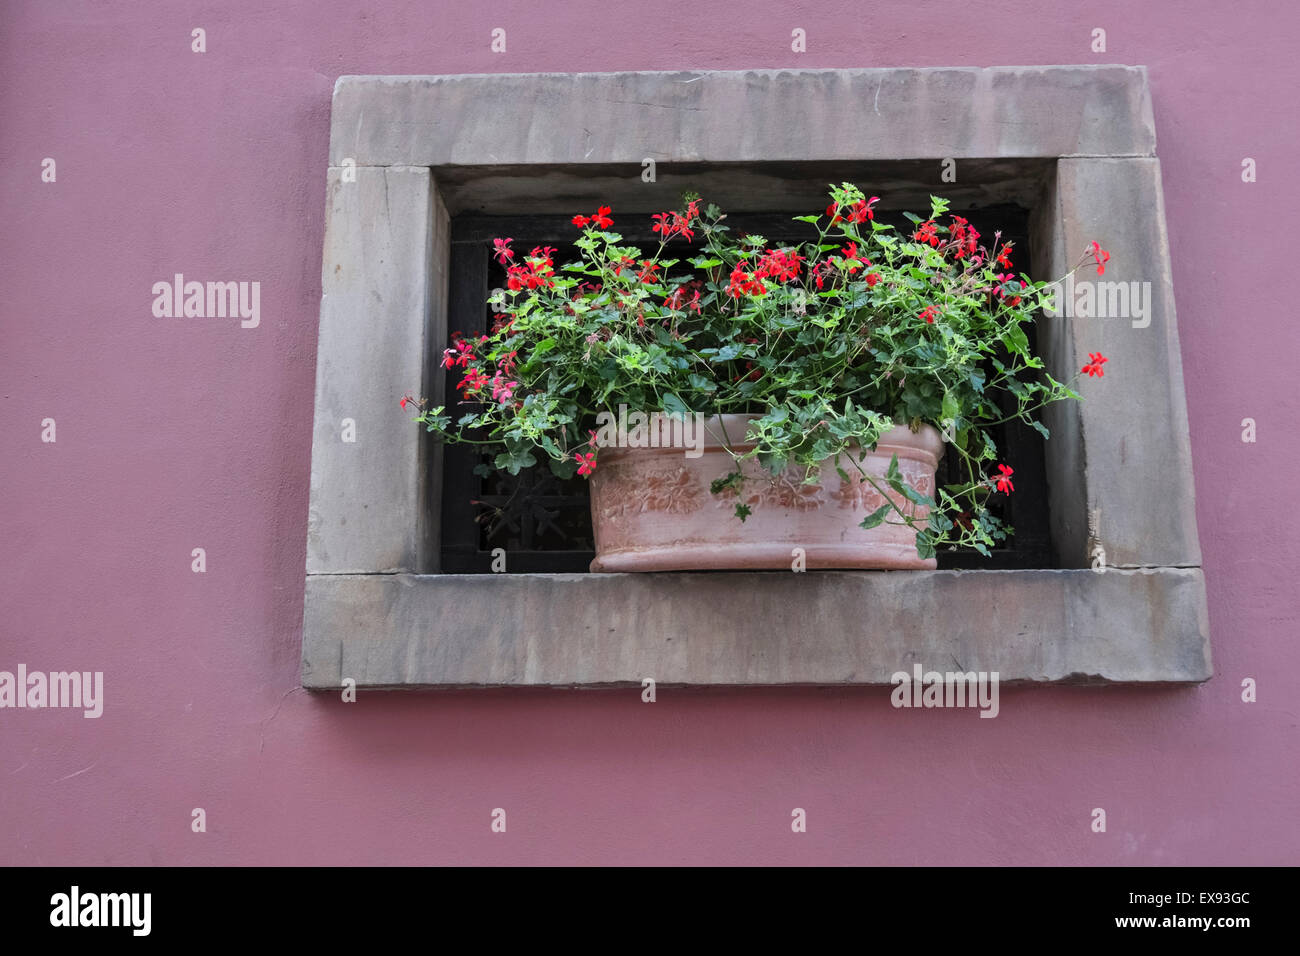 Flowering geranium plant displayed on colourful building wall. Stock Photo